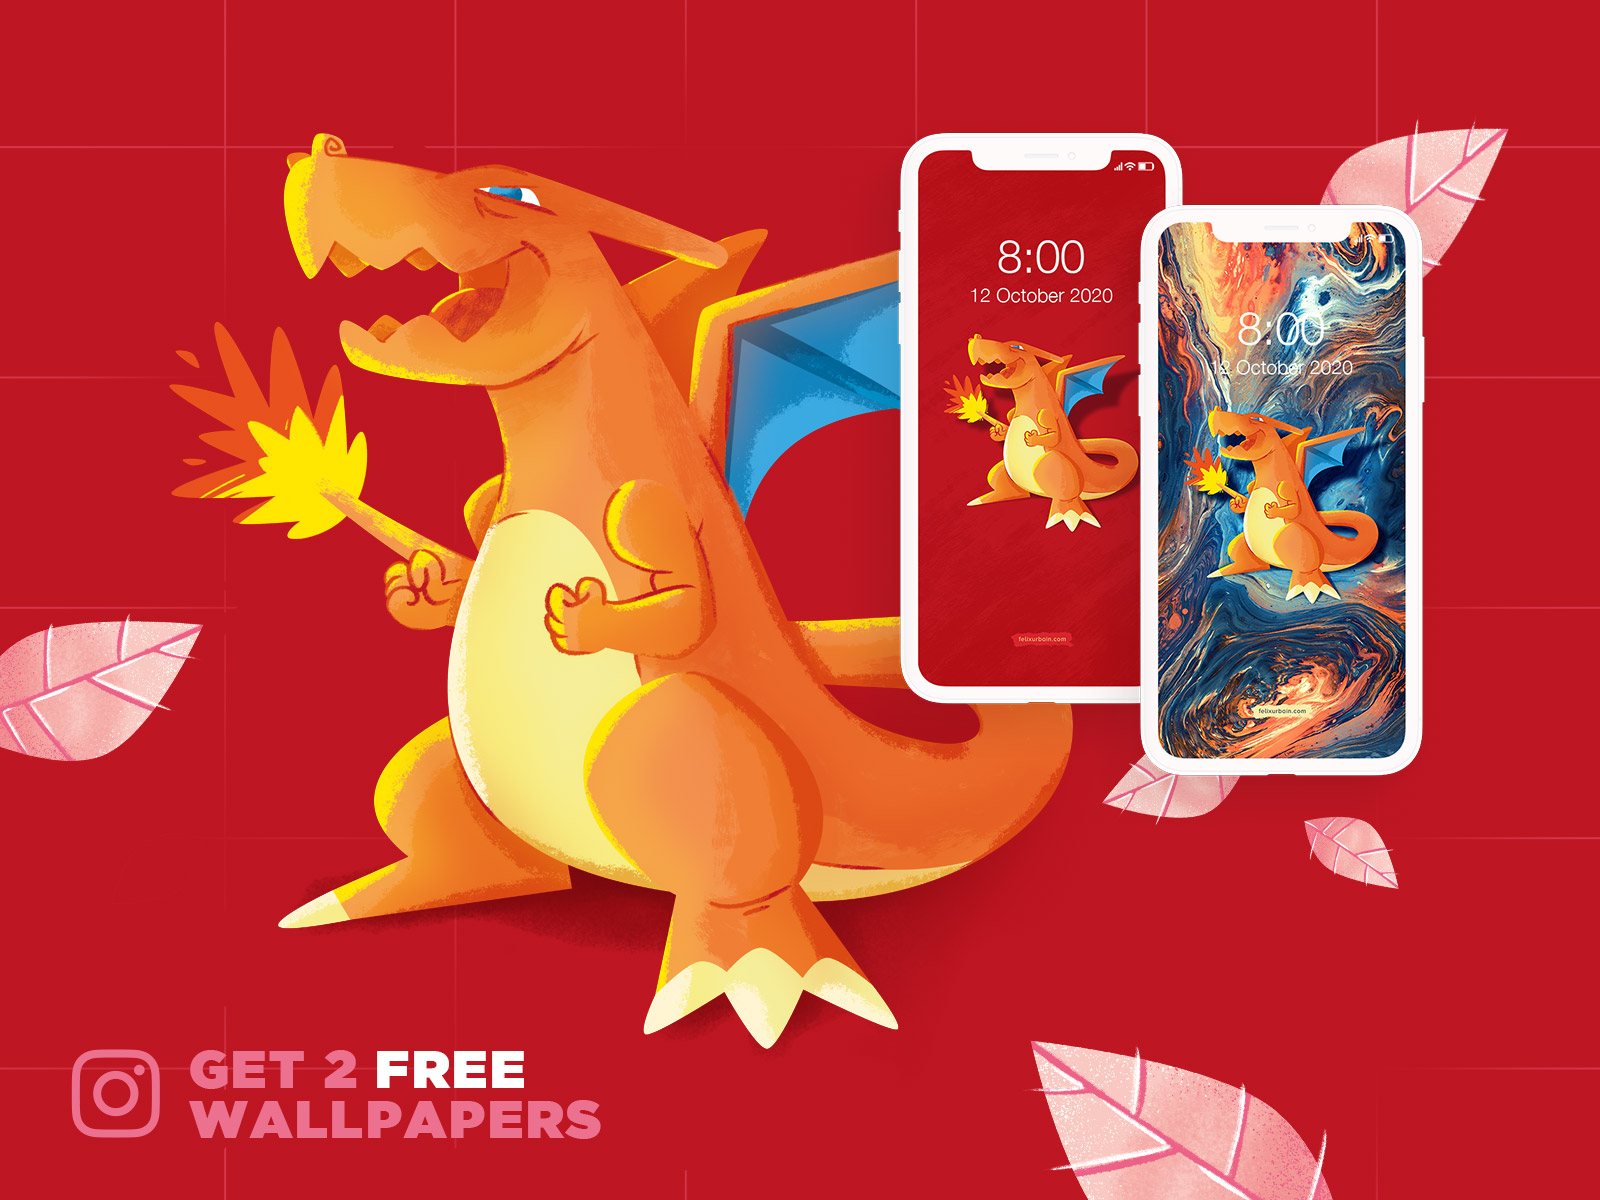 Download Charizard Pokémon wallpapers for mobile phone free Charizard  Pokémon HD pictures